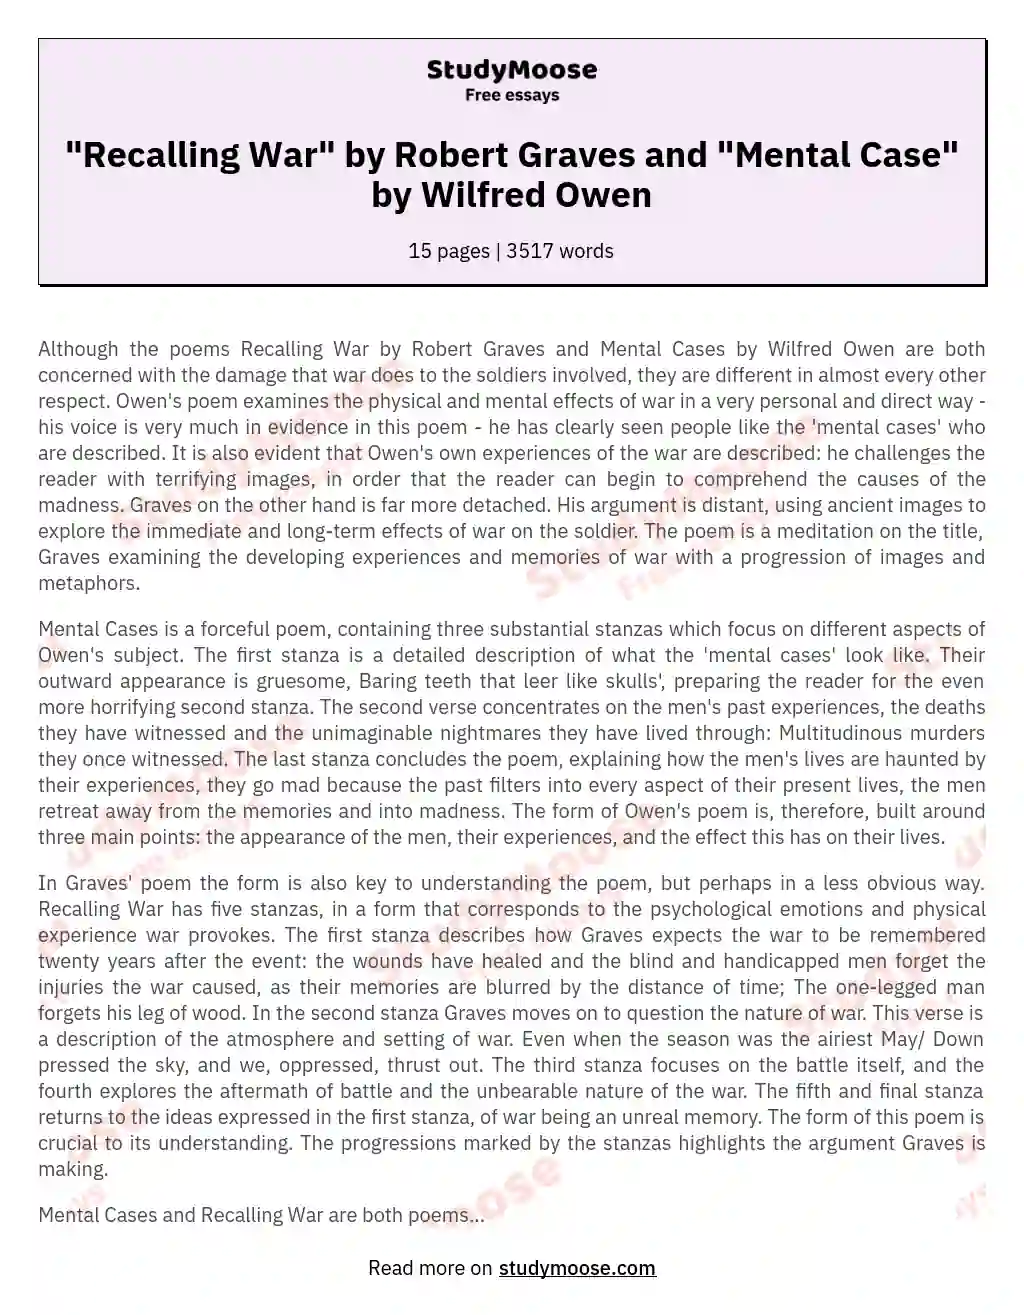 "Recalling War" by Robert Graves and "Mental Case" by Wilfred Owen